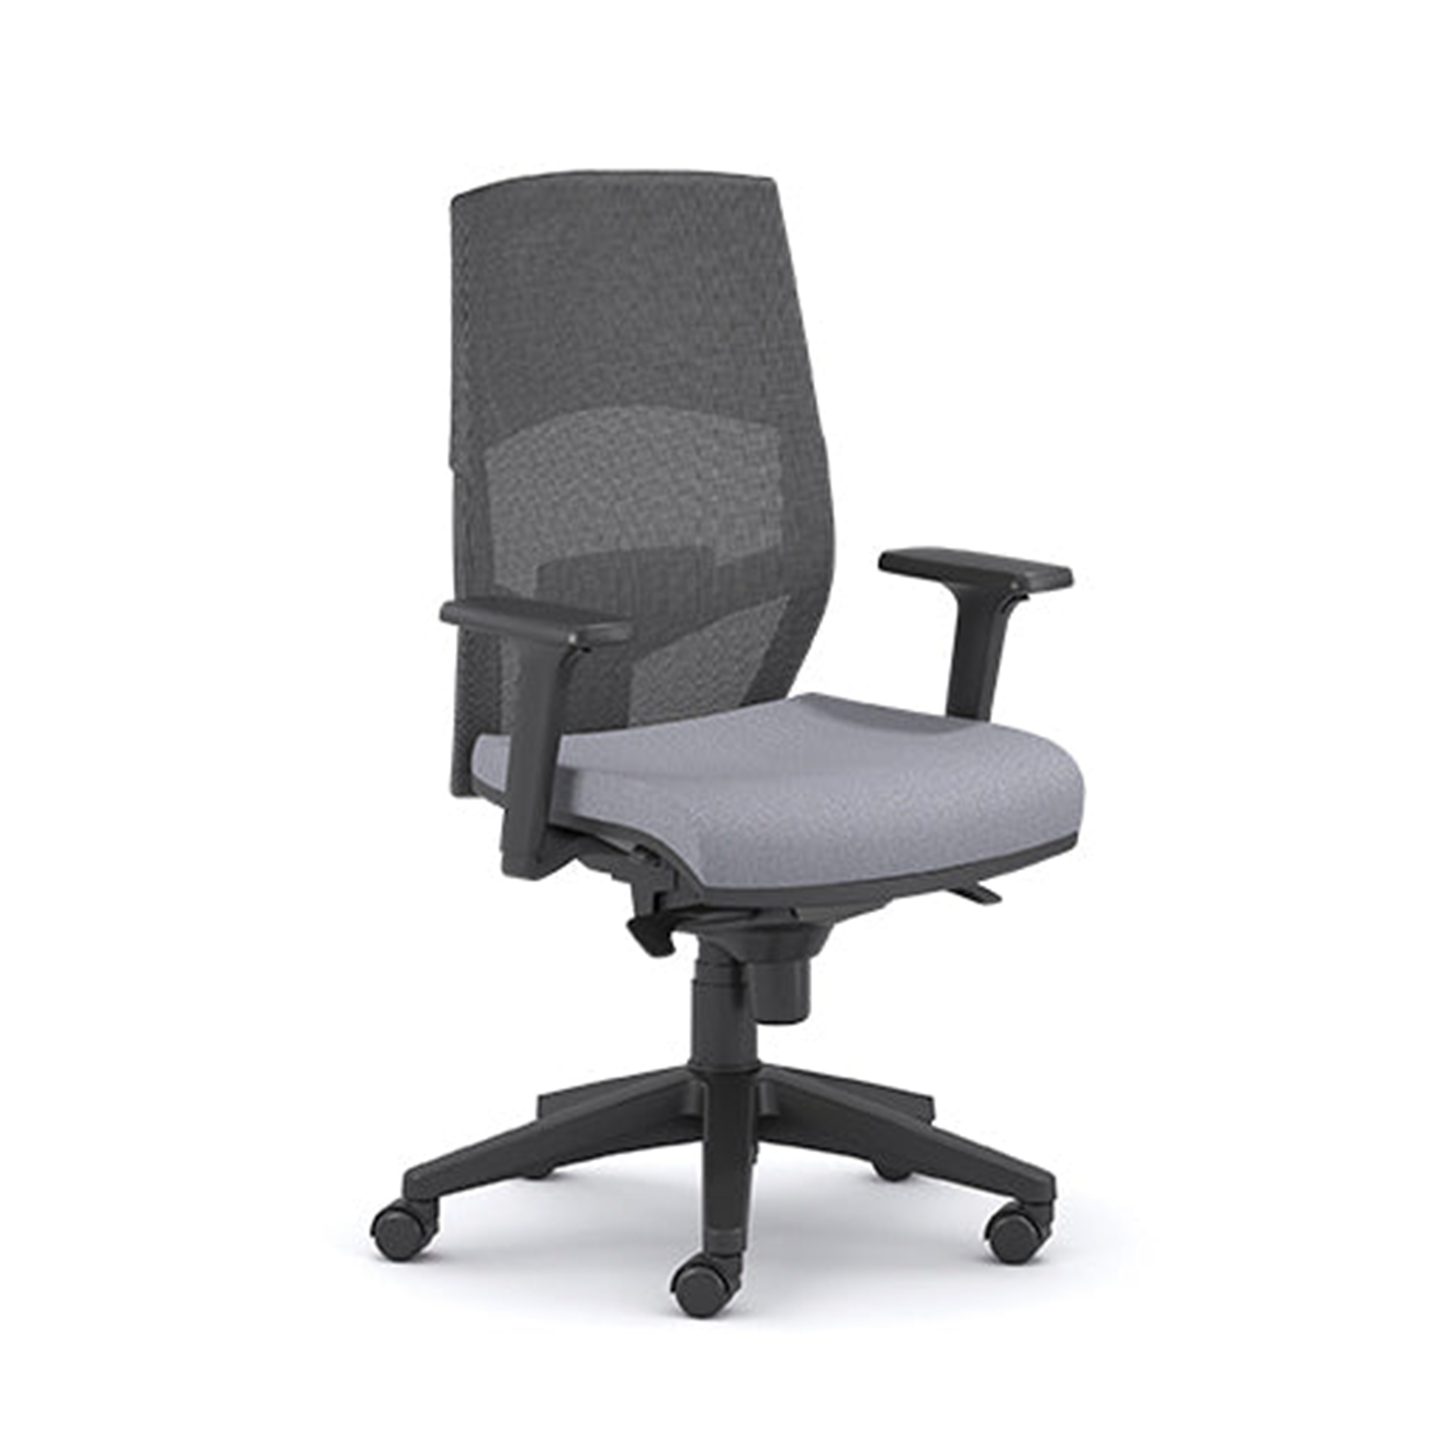 Tagix Office chair